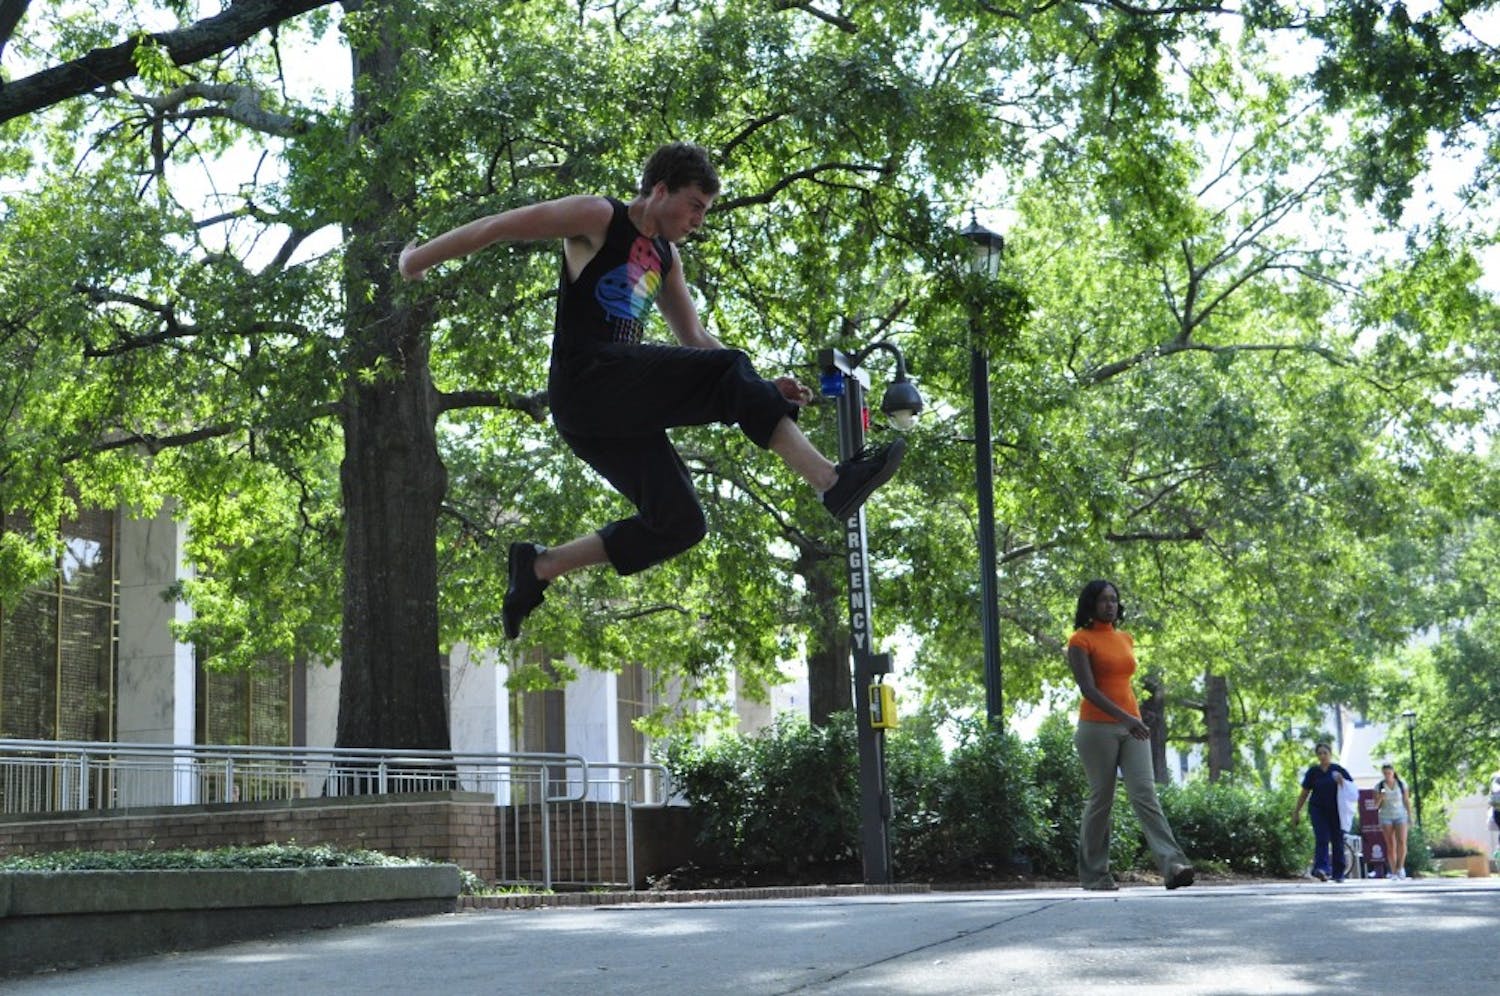 	A group of students and amateur free runners are working to start a parkour club on campus, called &#8220;Carolina Movement.&#8221; Members have been practicing parkour anywhere from 1 day to 2 years and some practice as much as 5 or 6 days a week.